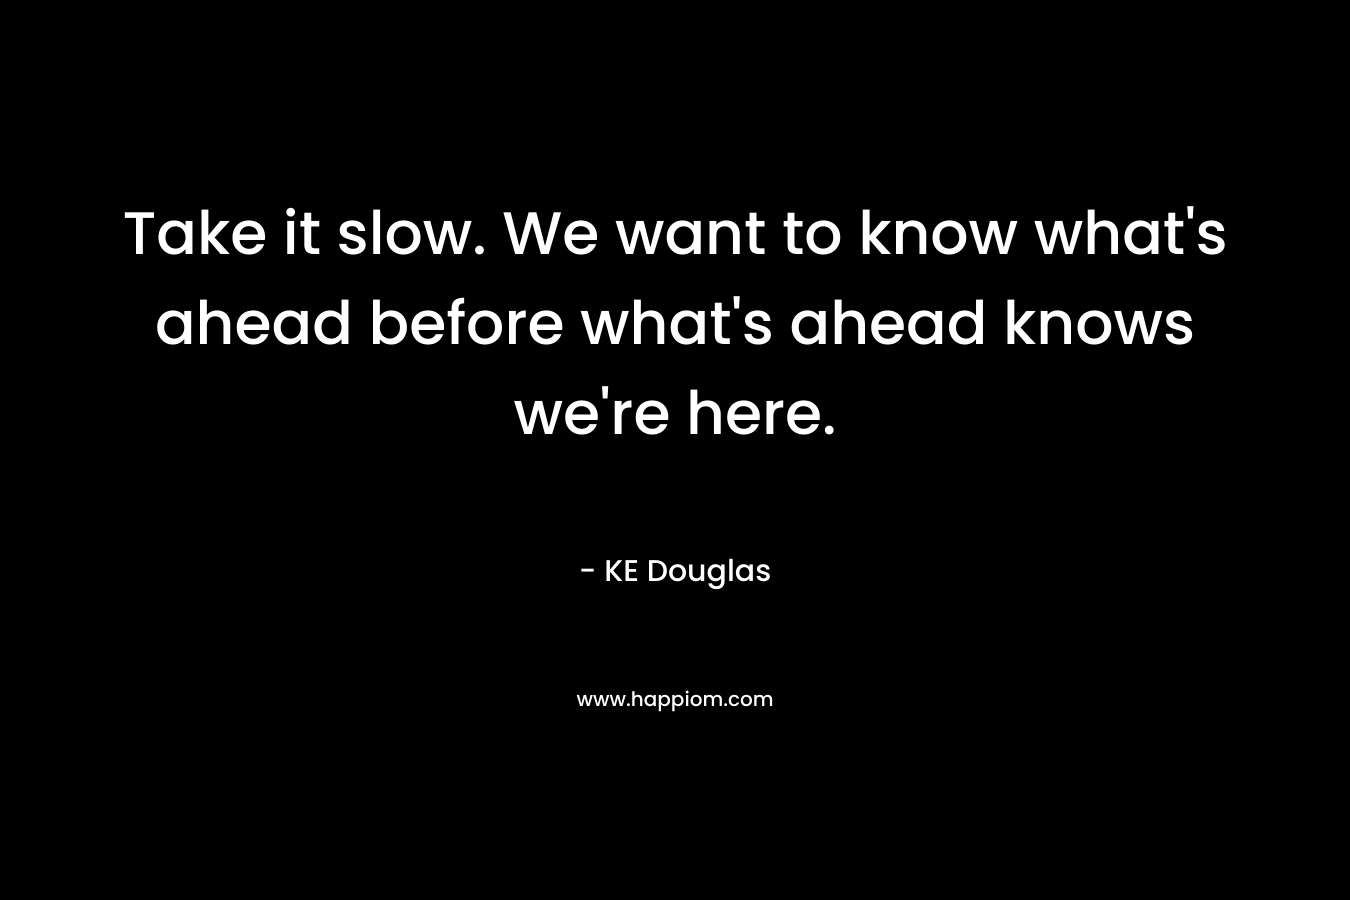 Take it slow. We want to know what's ahead before what's ahead knows we're here.